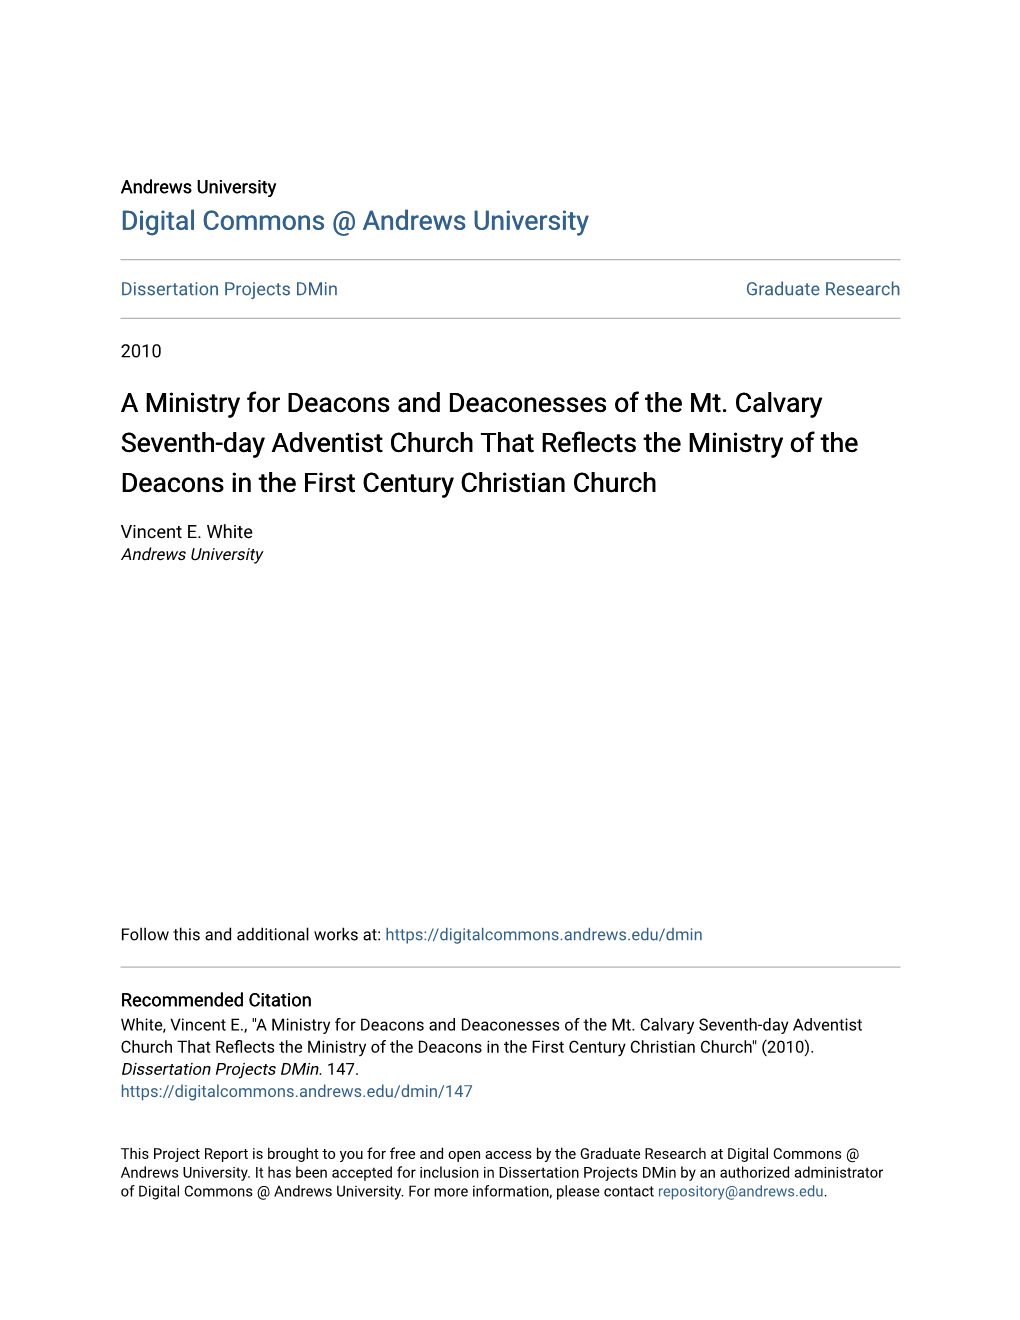 A Ministry for Deacons and Deaconesses of the Mt. Calvary